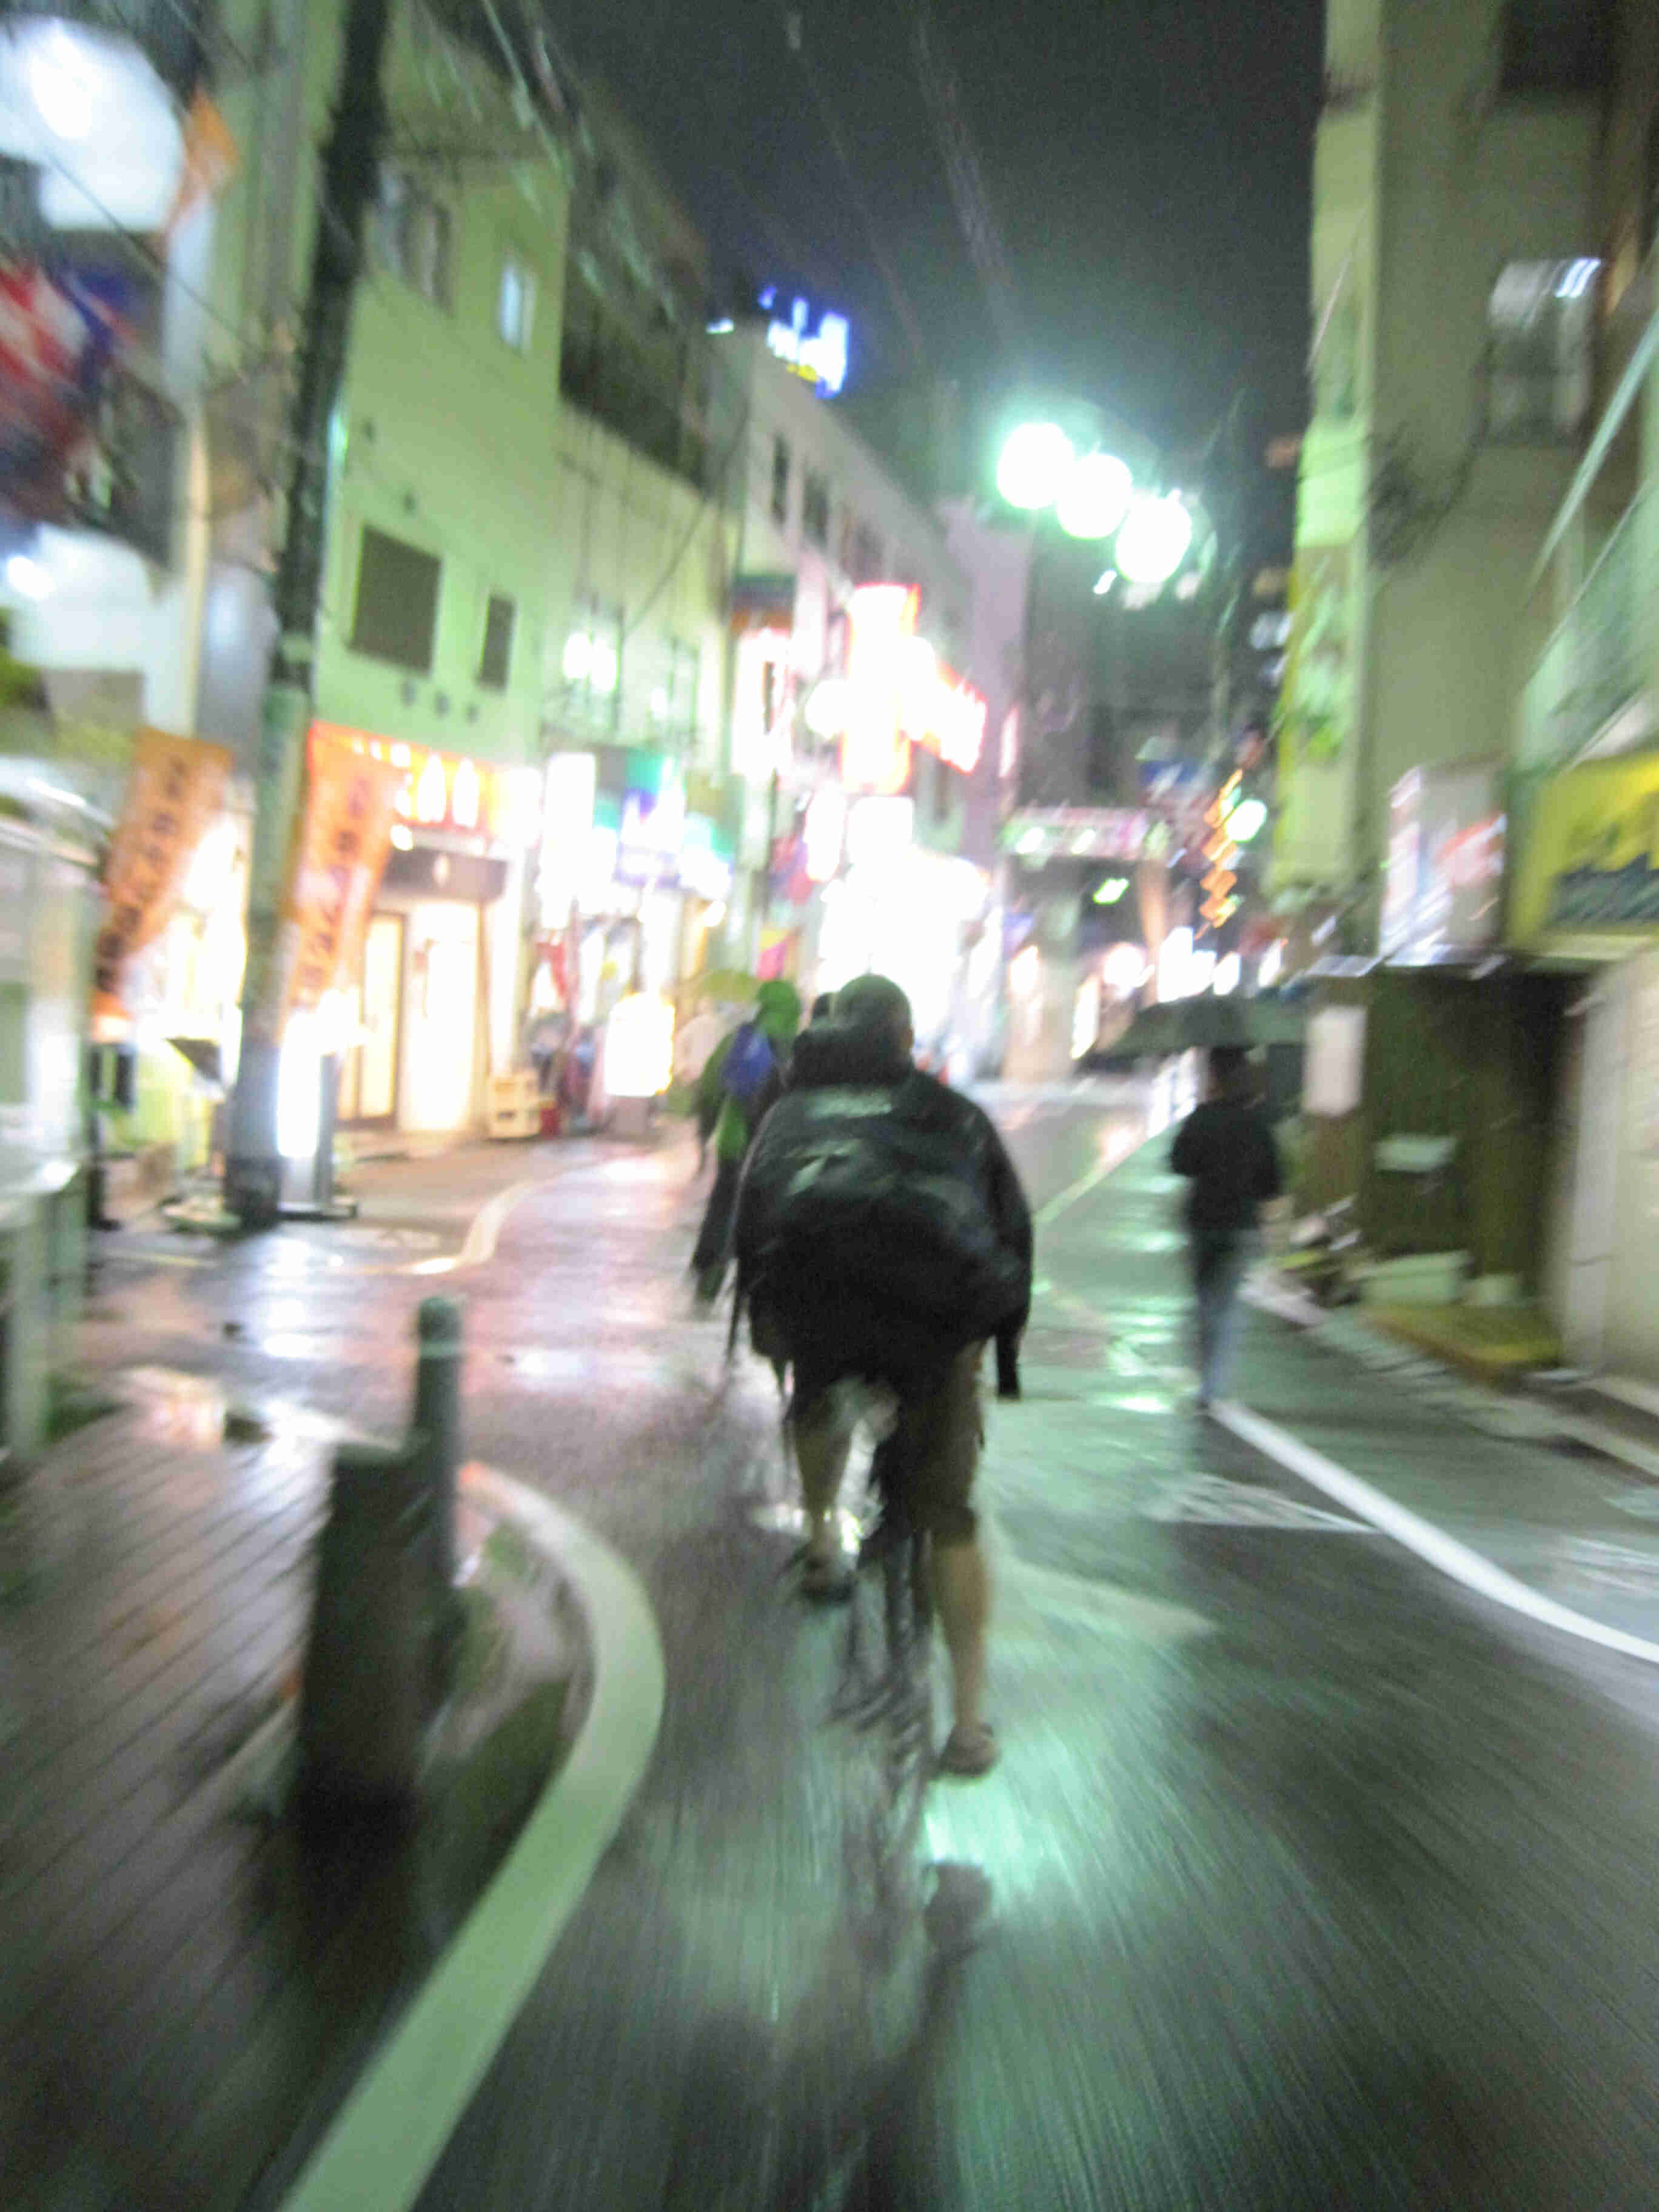 Rear view of cyclists, riding in single file at night, straight away on a narrow city street, with buildings on the side